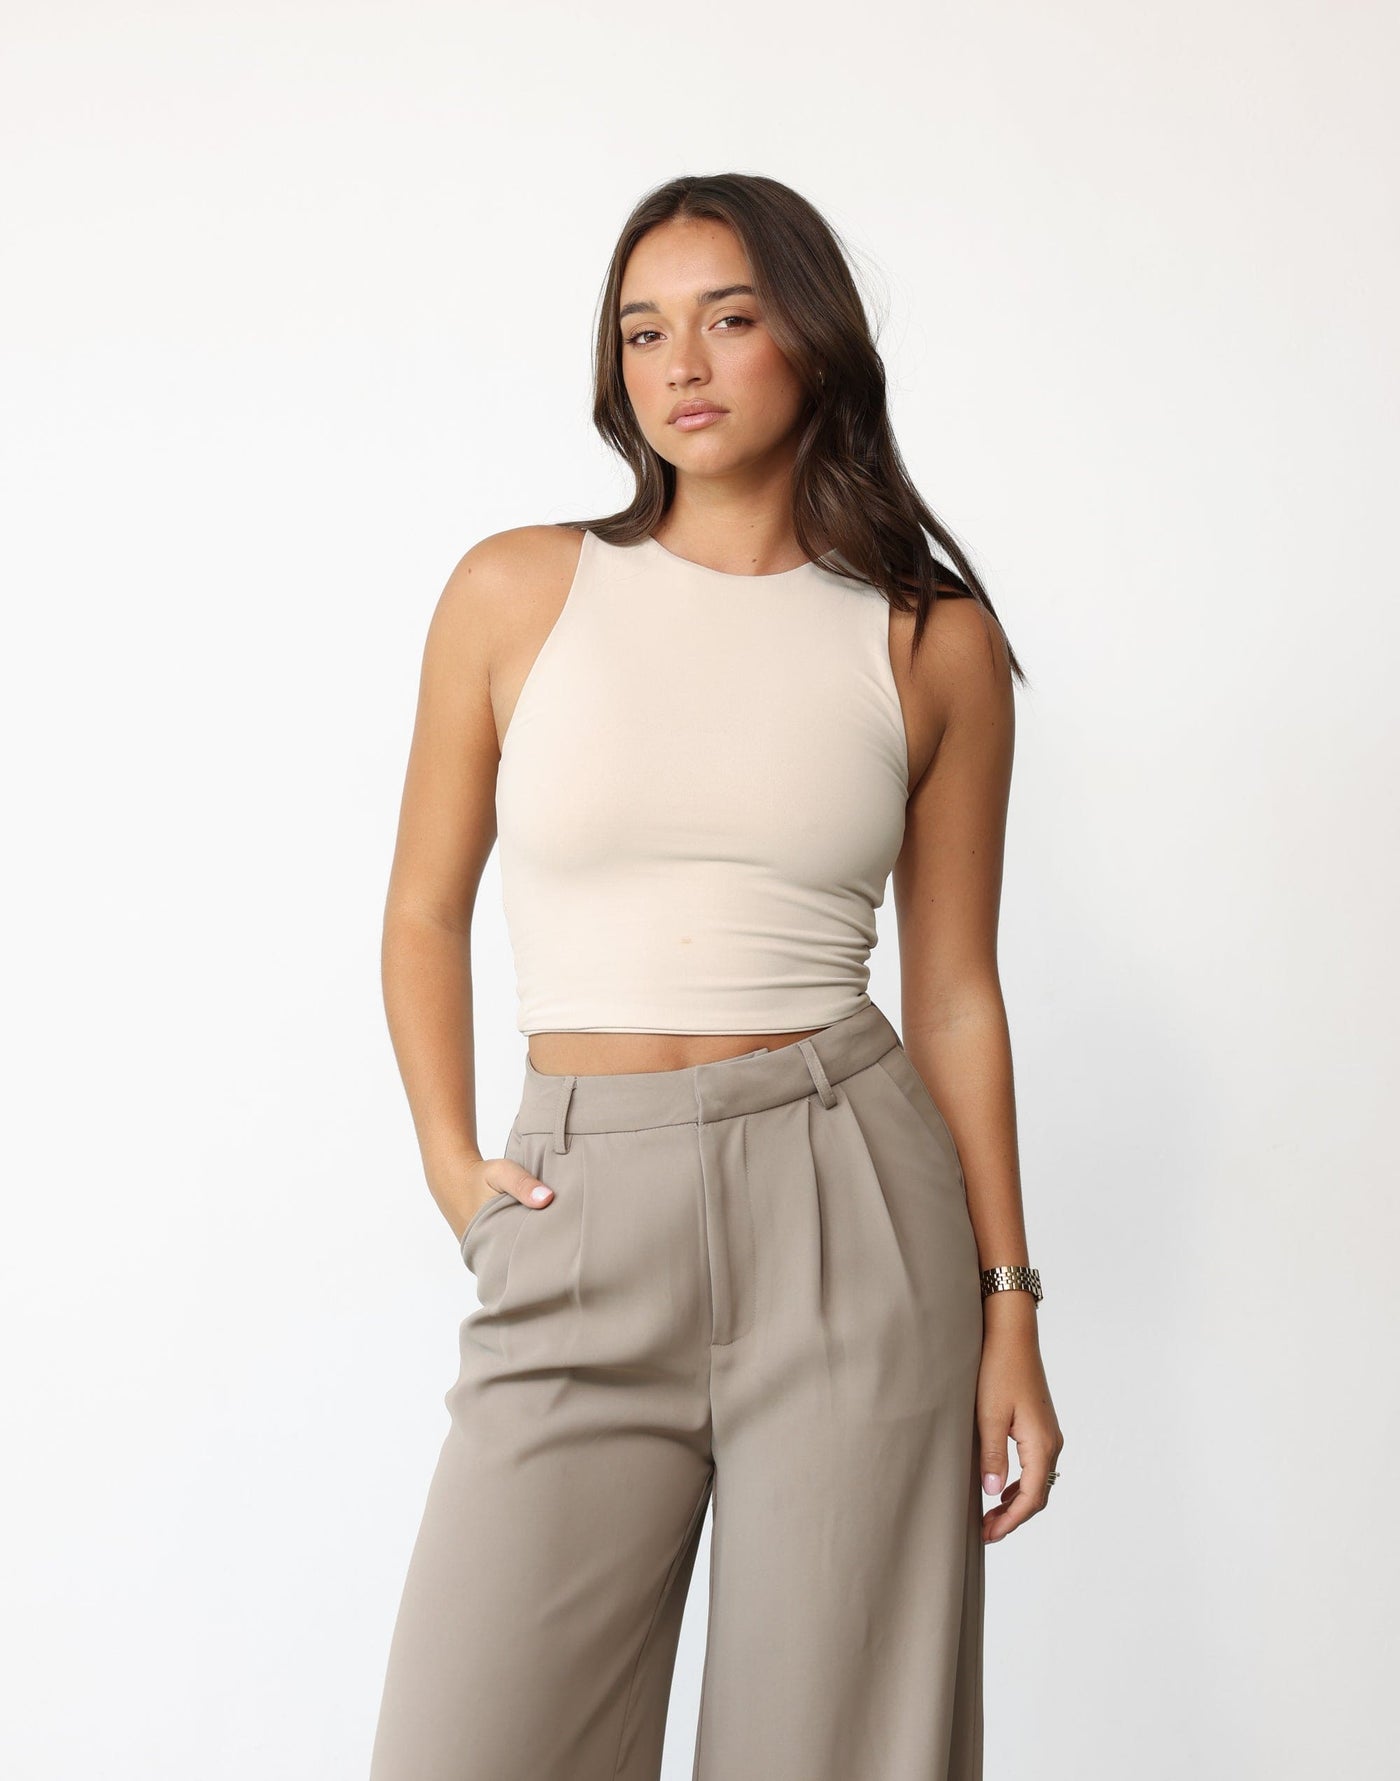 Alainn Top (Beige) - Bodycon Double Lined Crop Top - Women's Top - Charcoal Clothing